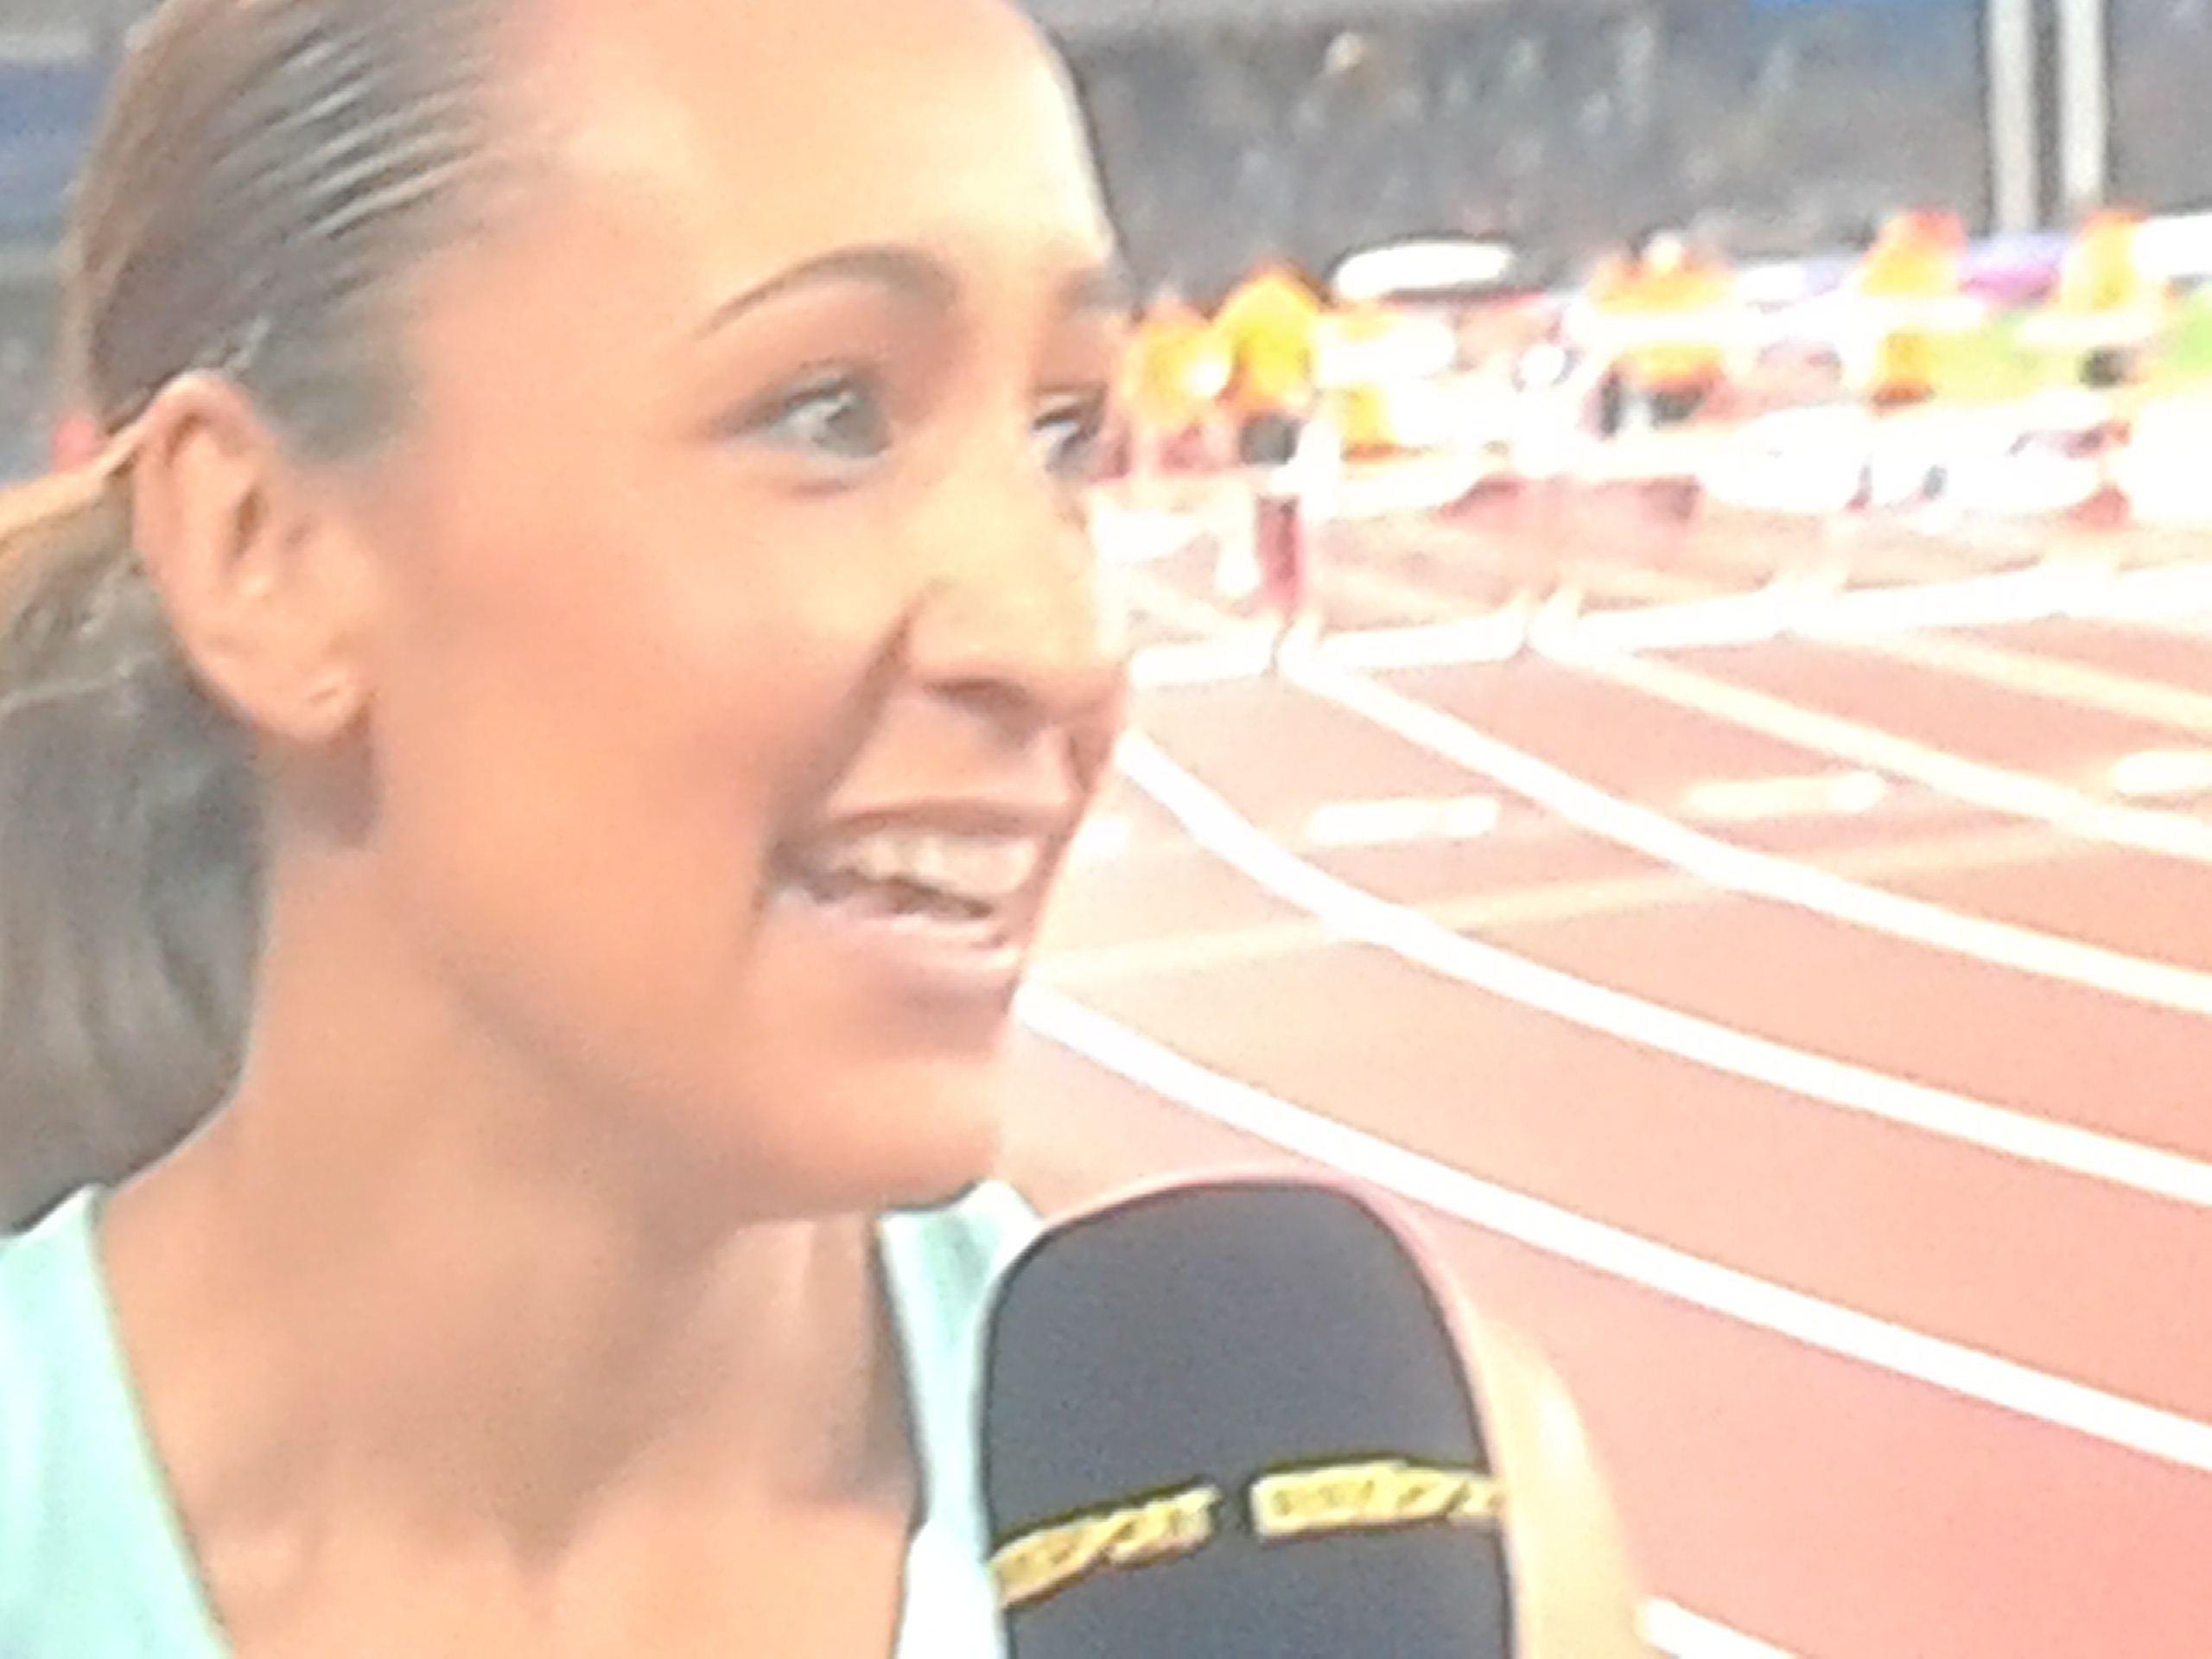 British Sheffield based sports star and Olympic Gold Medallist Jessica Ennis